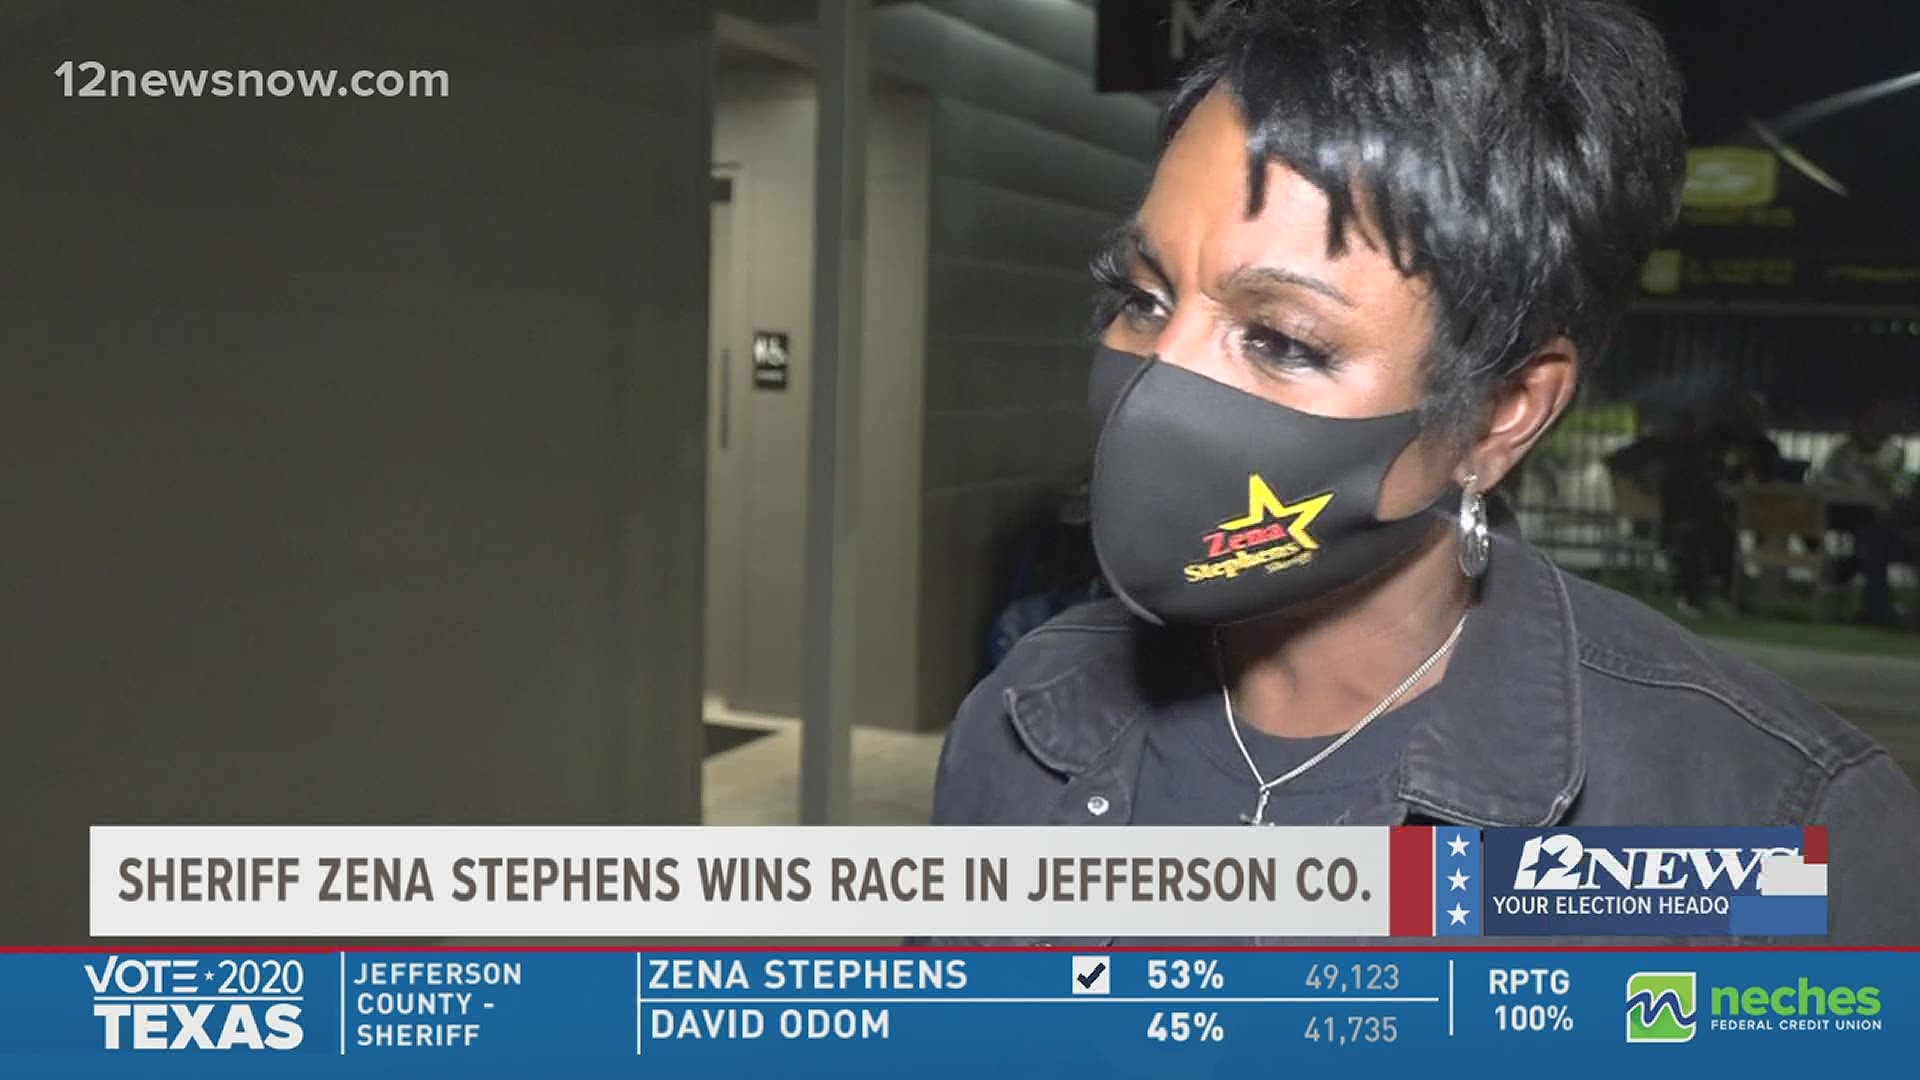 In the last four years, Jefferson County Sheriff Zena Stephens said she is dealing with mental health issues, cutting expenses to save taxpayers dollars.